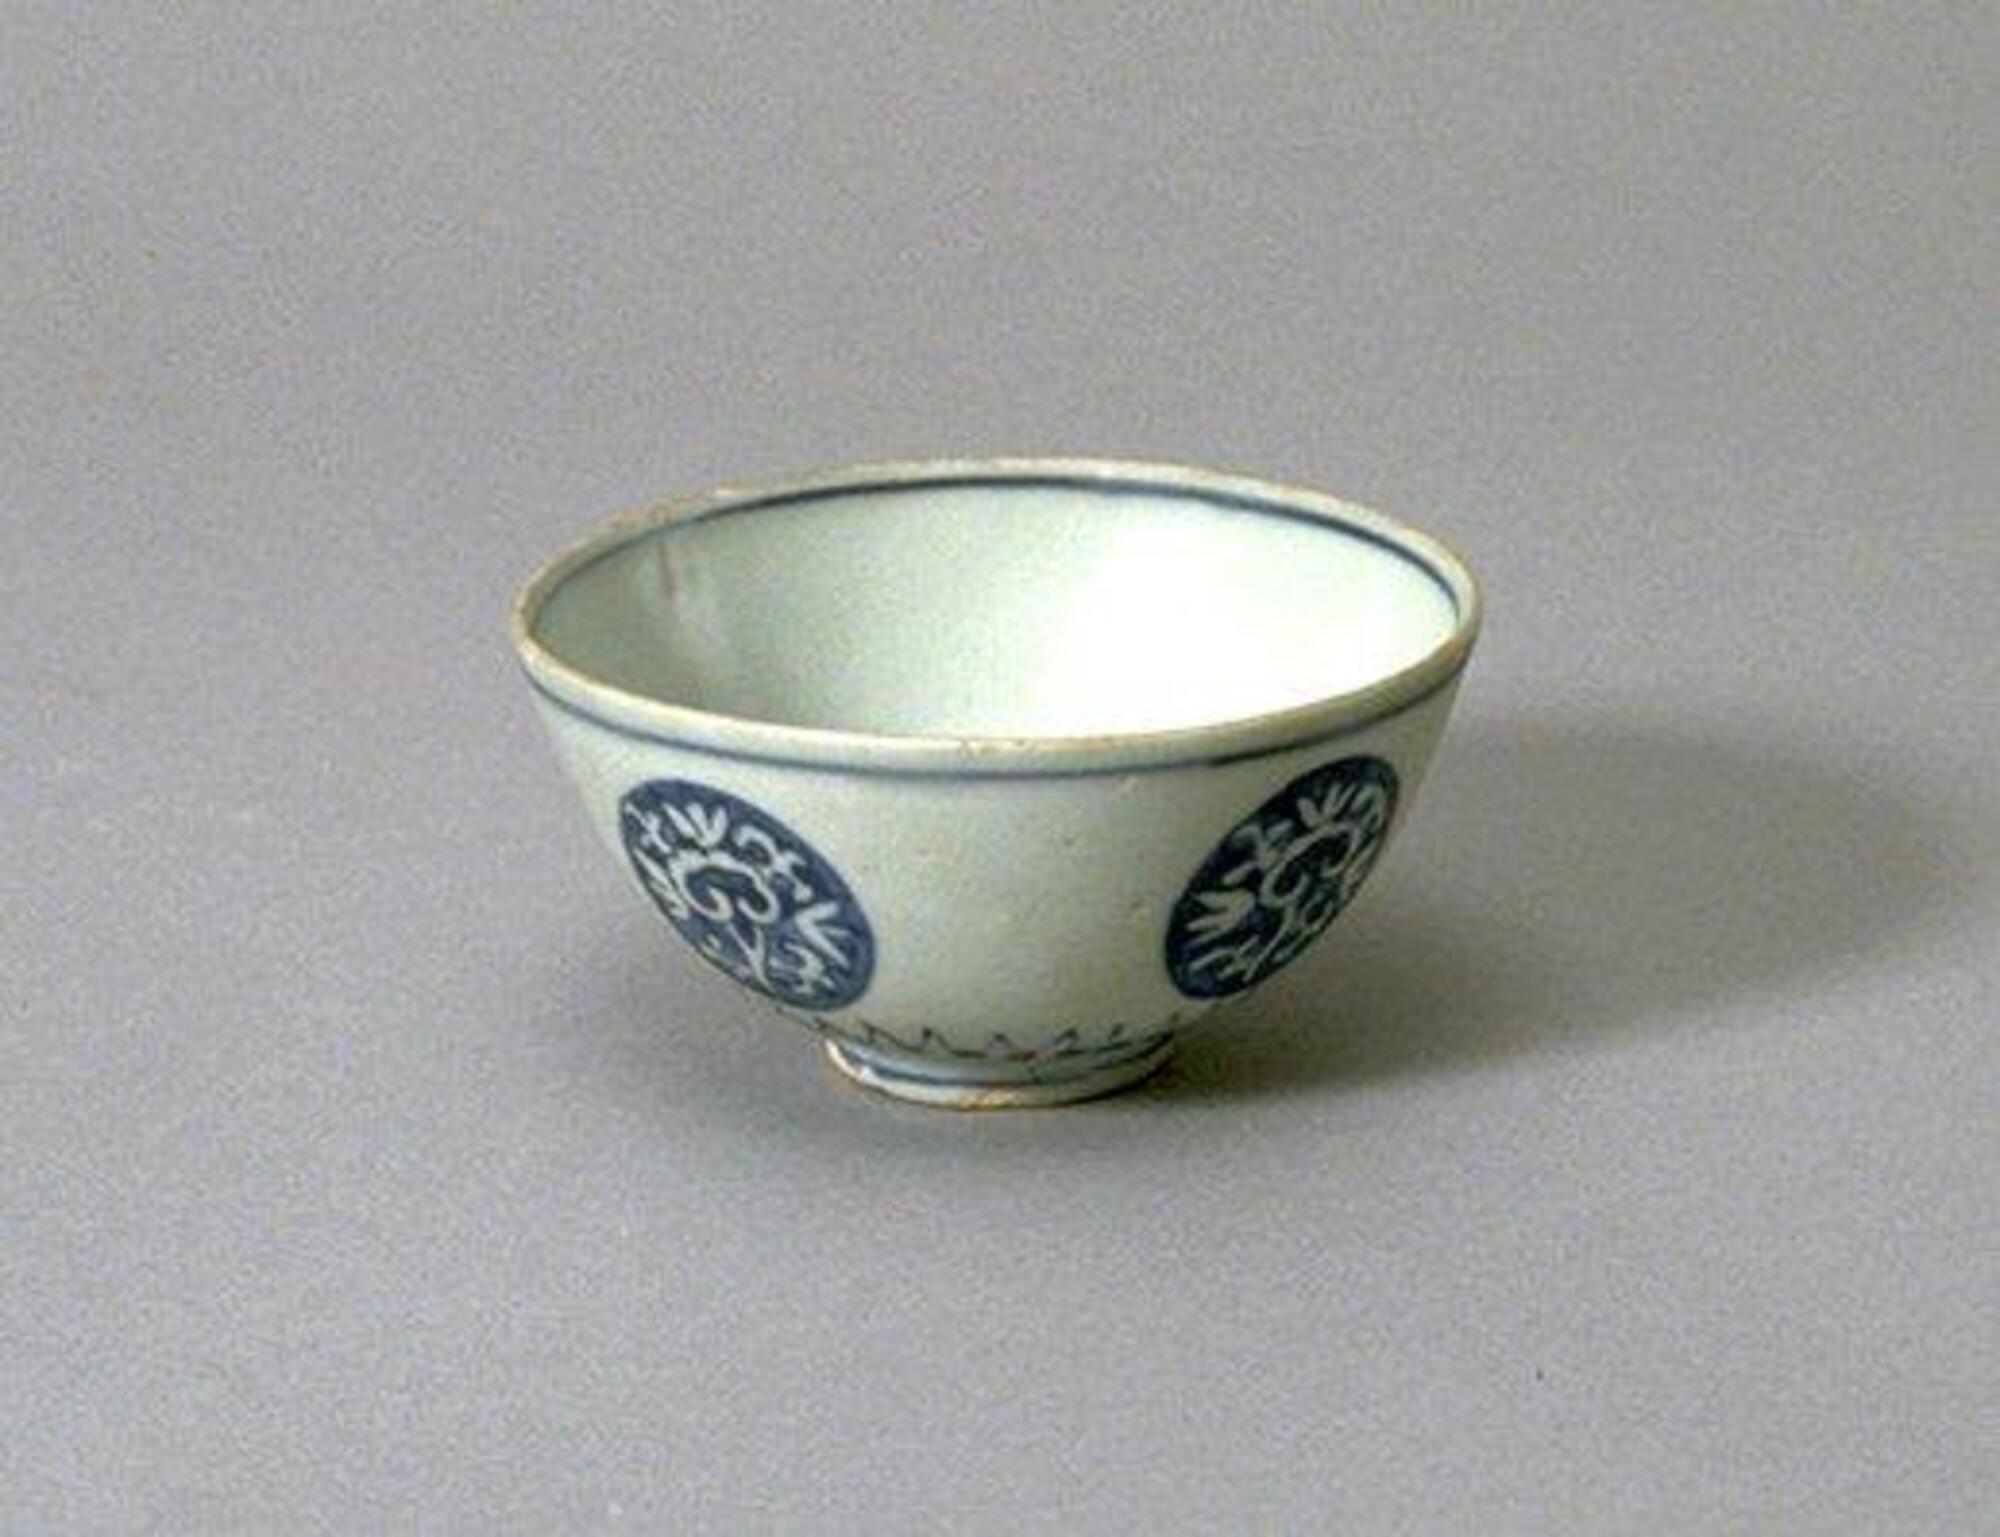 Blue and white porcelain bowl with medallion designs and blue line surrounding the rim.